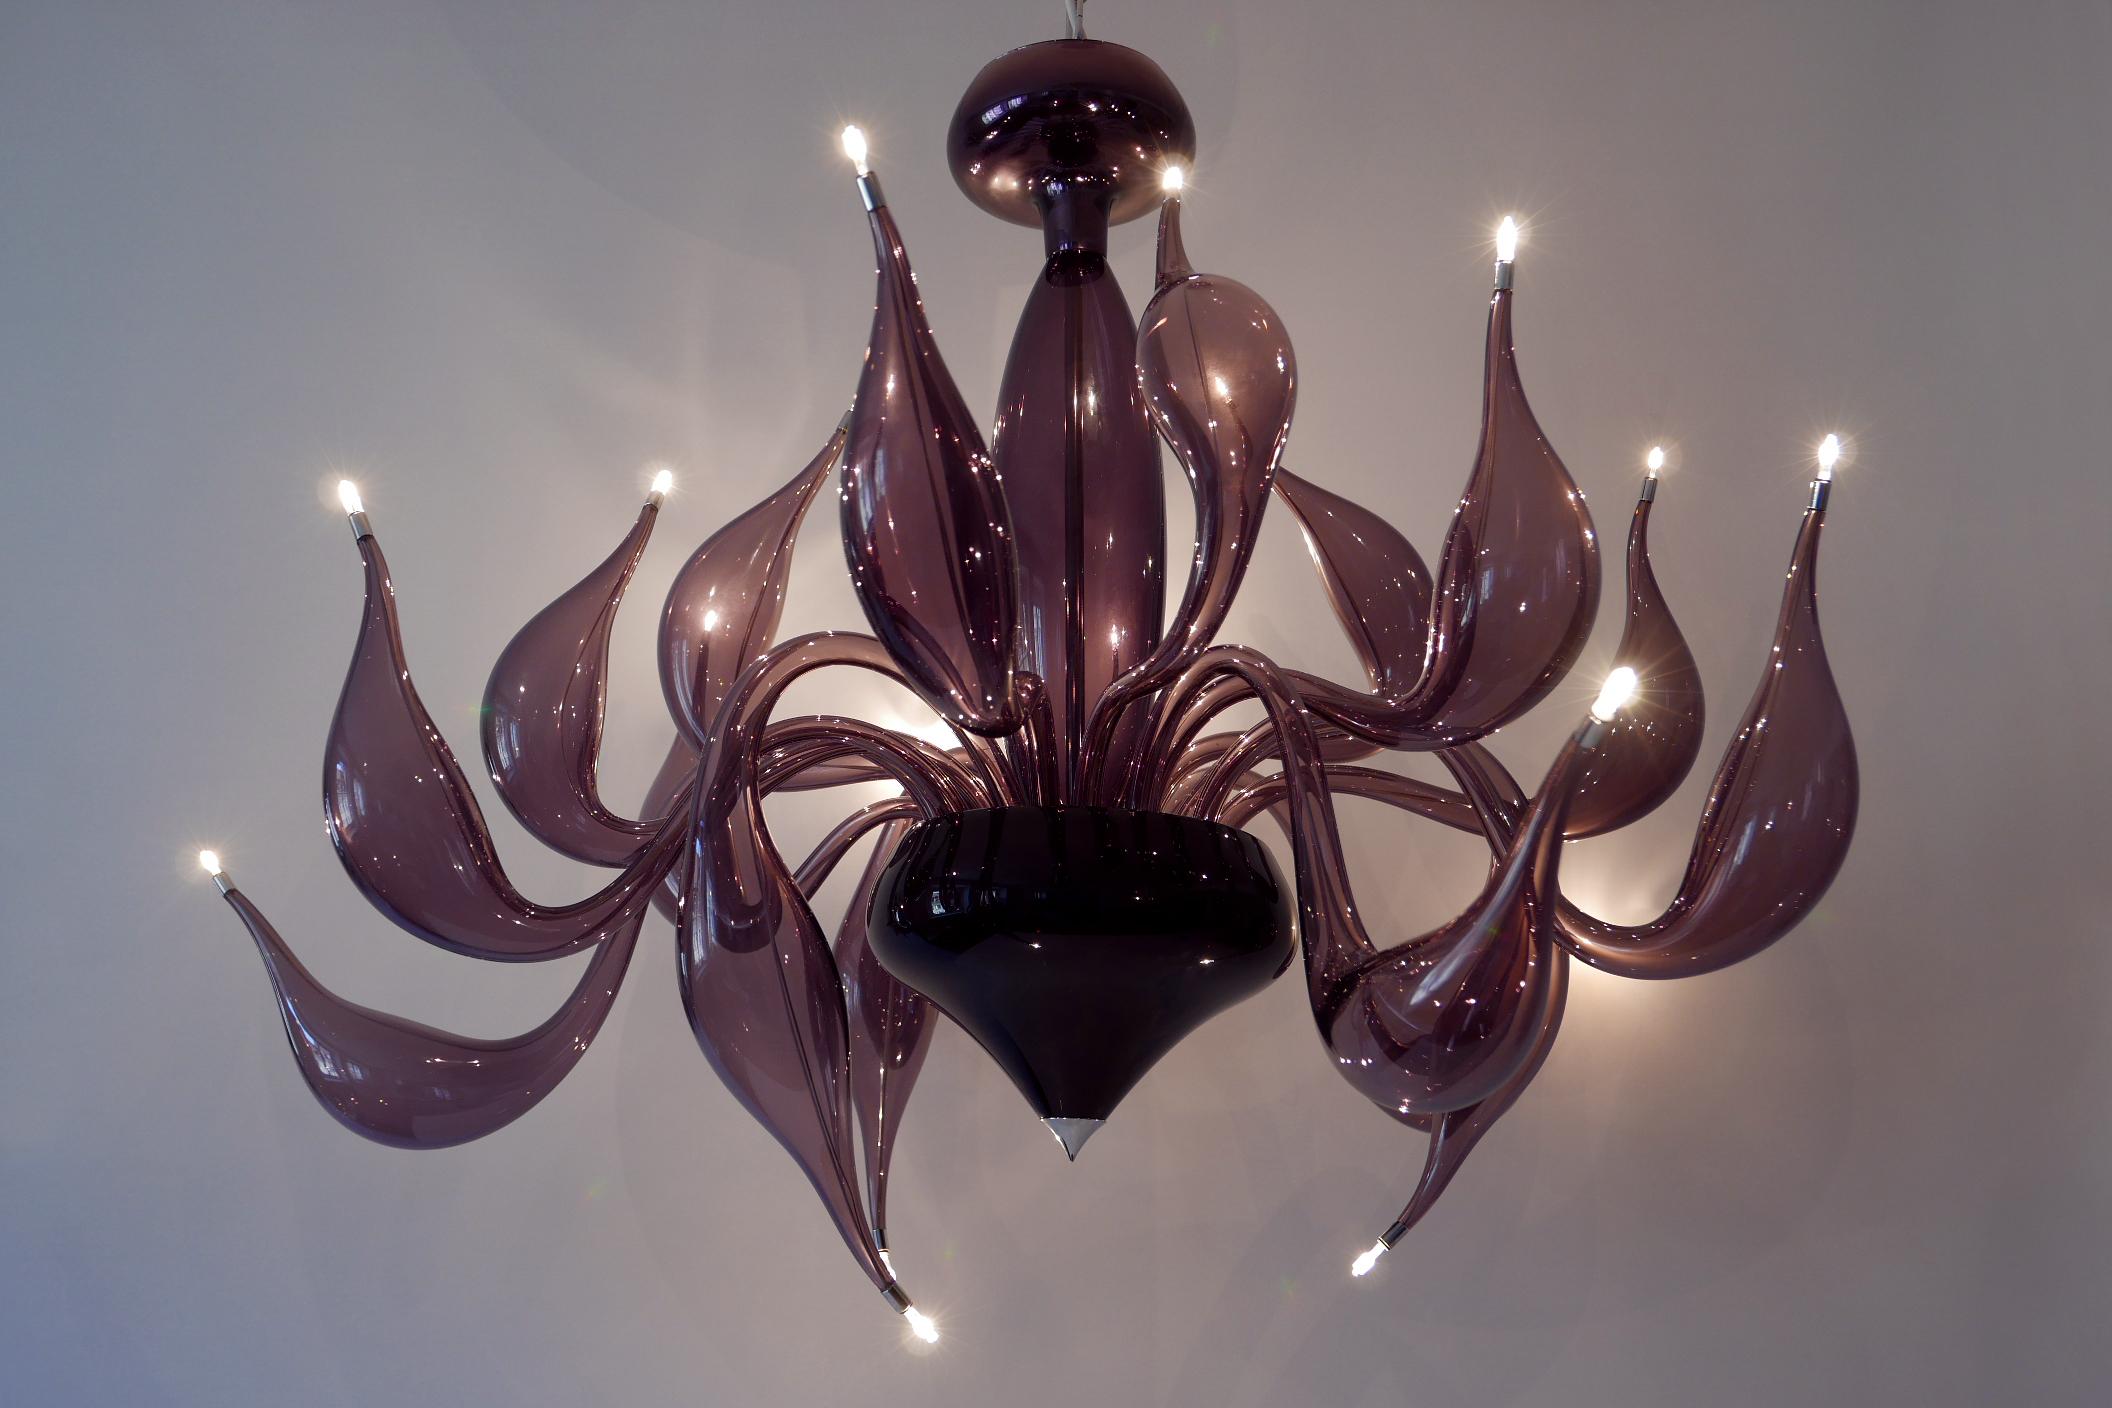 Original light object / sculpture Murano glass chandelier with 18 lights by Fabio Fornasier, 2004 for LU Murano, Italy. Makers mark: Fabio Fornasier. LU Murano. Including a replacement arm.

This one is bought by the previous owner in